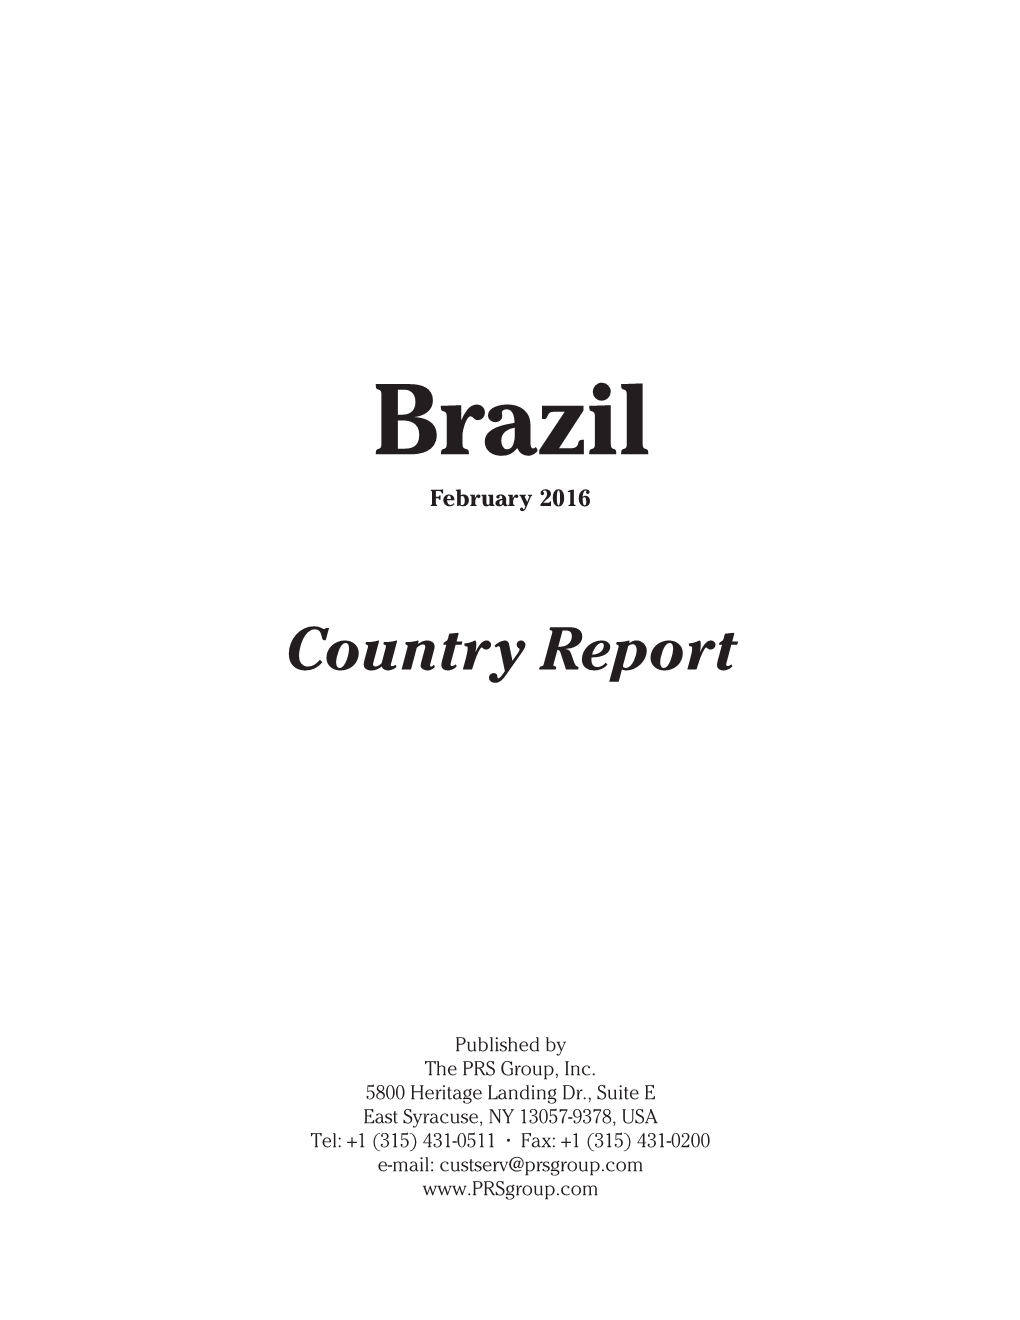 Sample Brazil Country Report